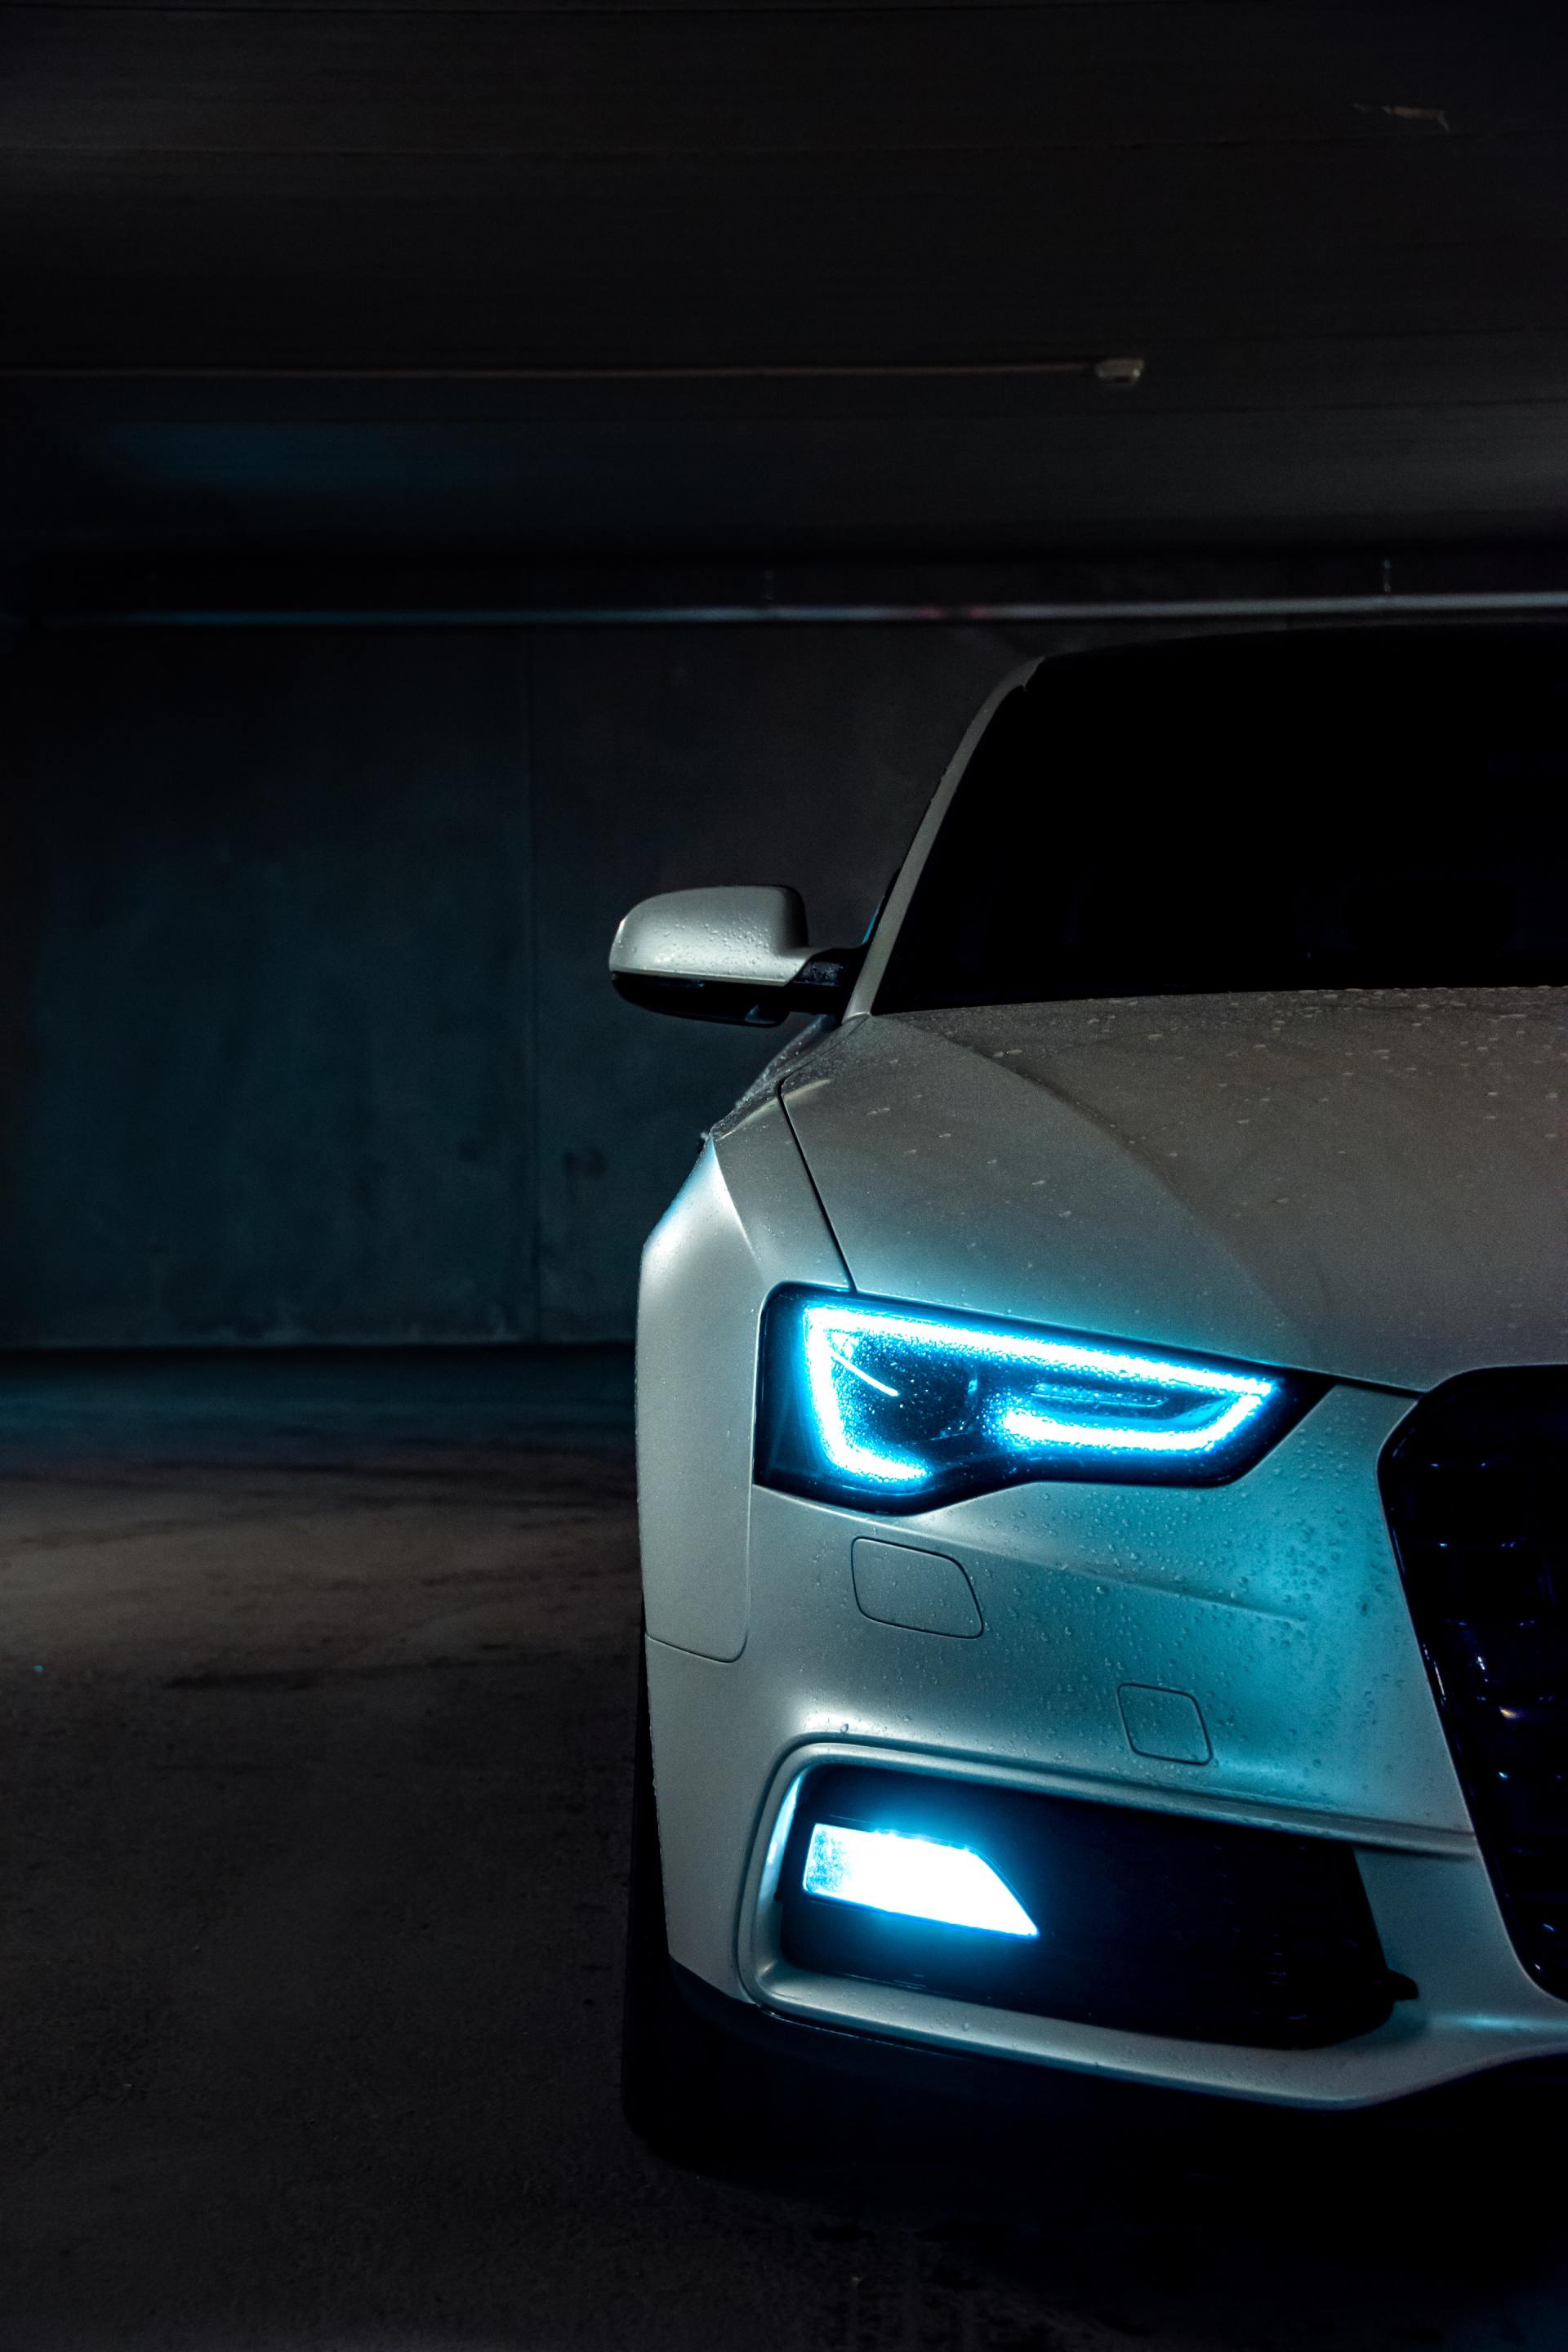 Picture of Audi in the rain at night